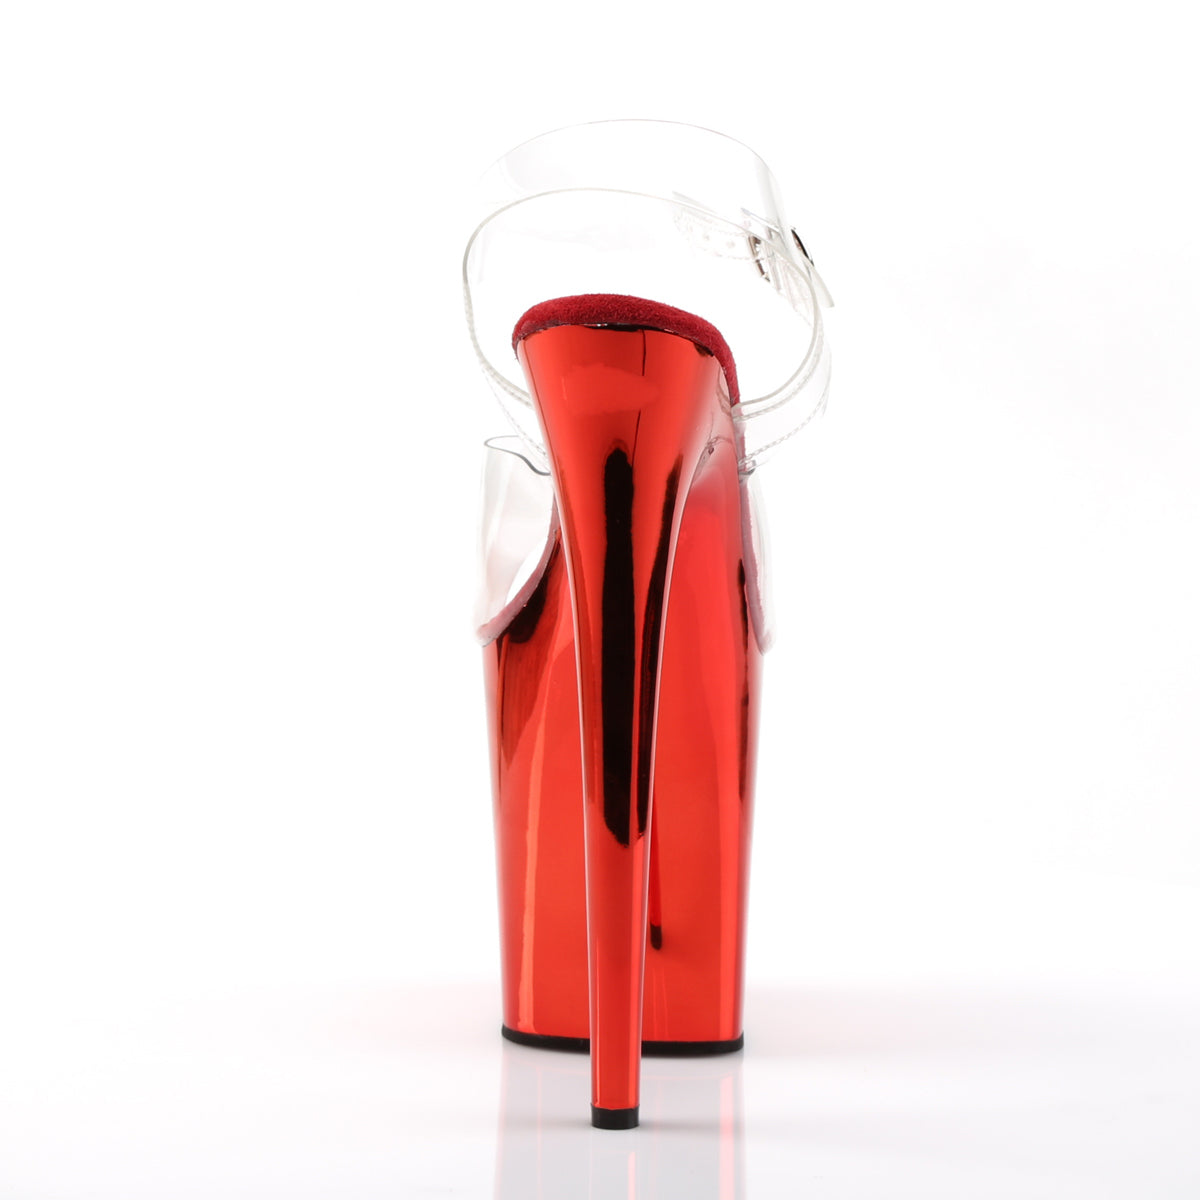 FLAMINGO-808 Pleaser Clear/Red Chrome Platform Shoes [Exotic Dancing Shoes]